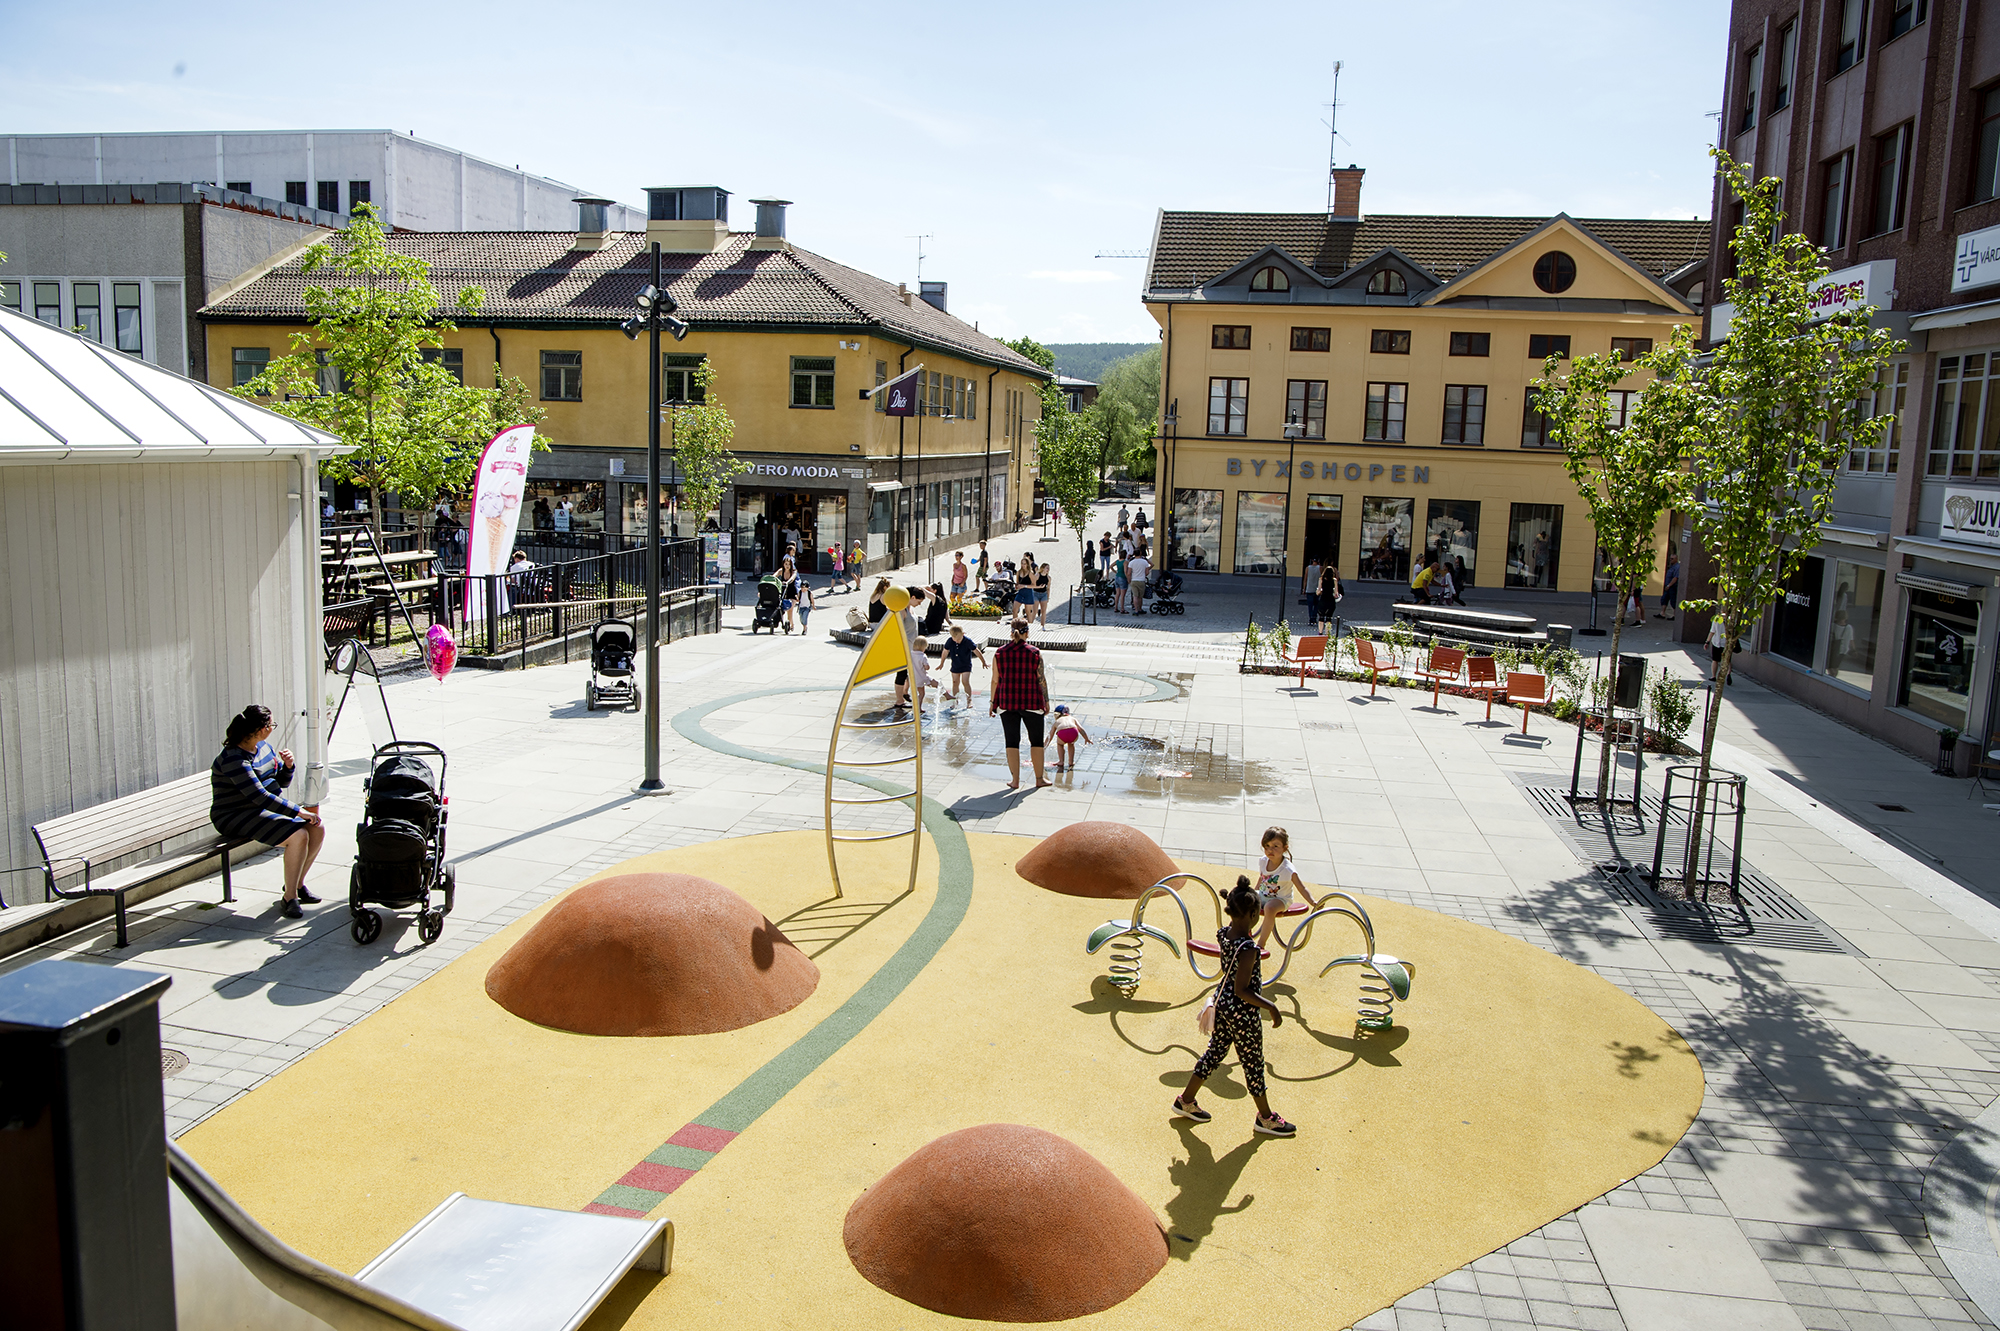 Featured image for “Healthy Cities Sveriges årskonferens i Falun 2022”